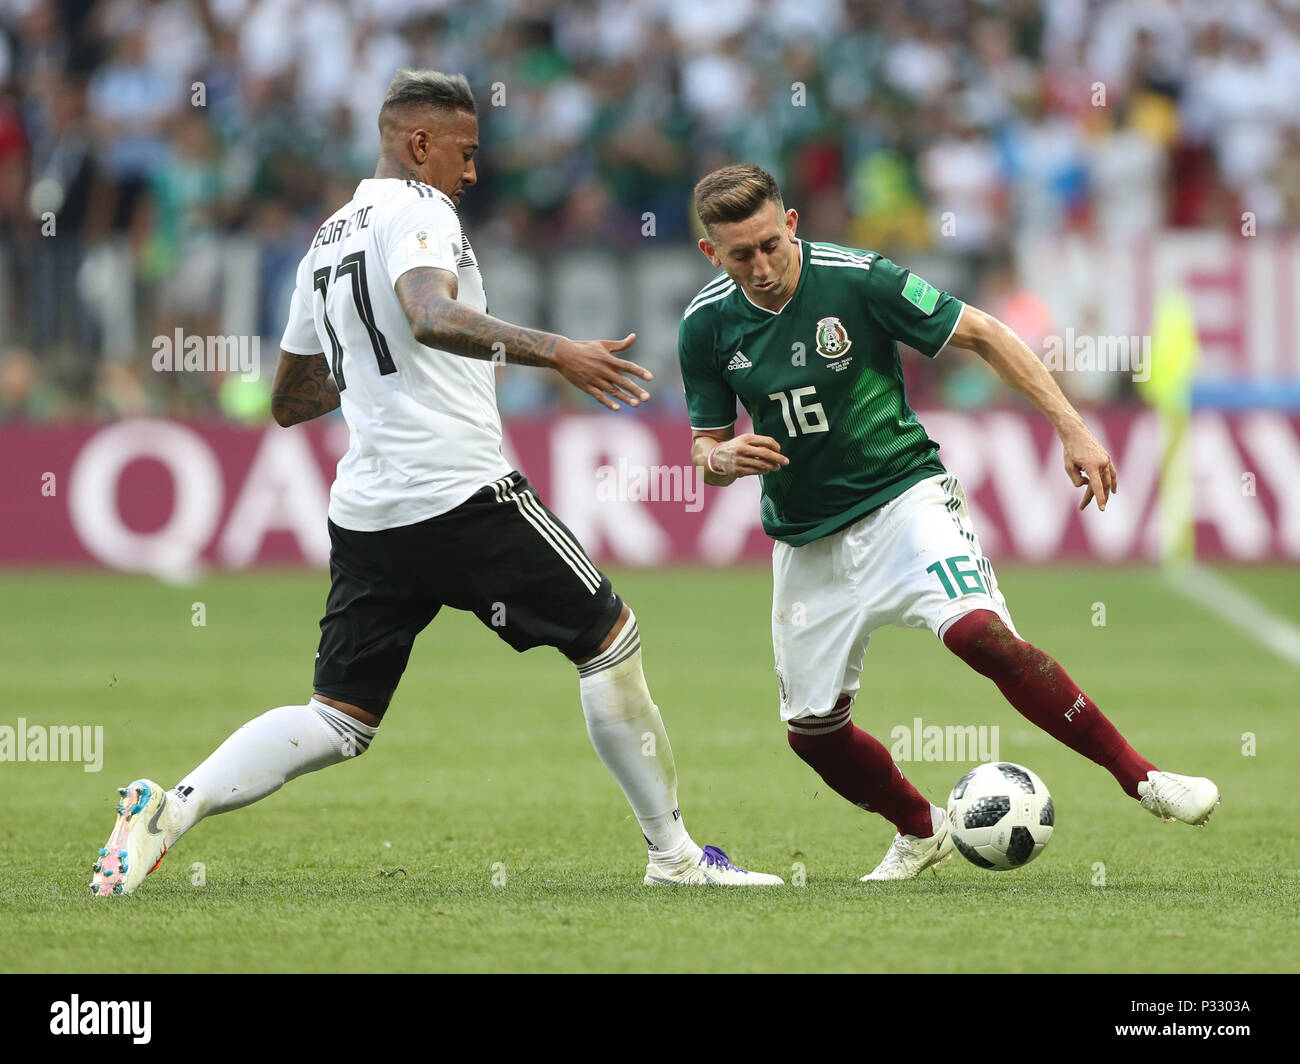 Moscow, Russia. 17th June, 2018. Jerome Boateng (L) of Germany vies with Hector Herrera of Mexico during a group F match between Germany and Mexico at the 2018 FIFA World Cup in Moscow, Russia, June 17, 2018. Credit: Xu Zijian/Xinhua/Alamy Live News Stock Photo